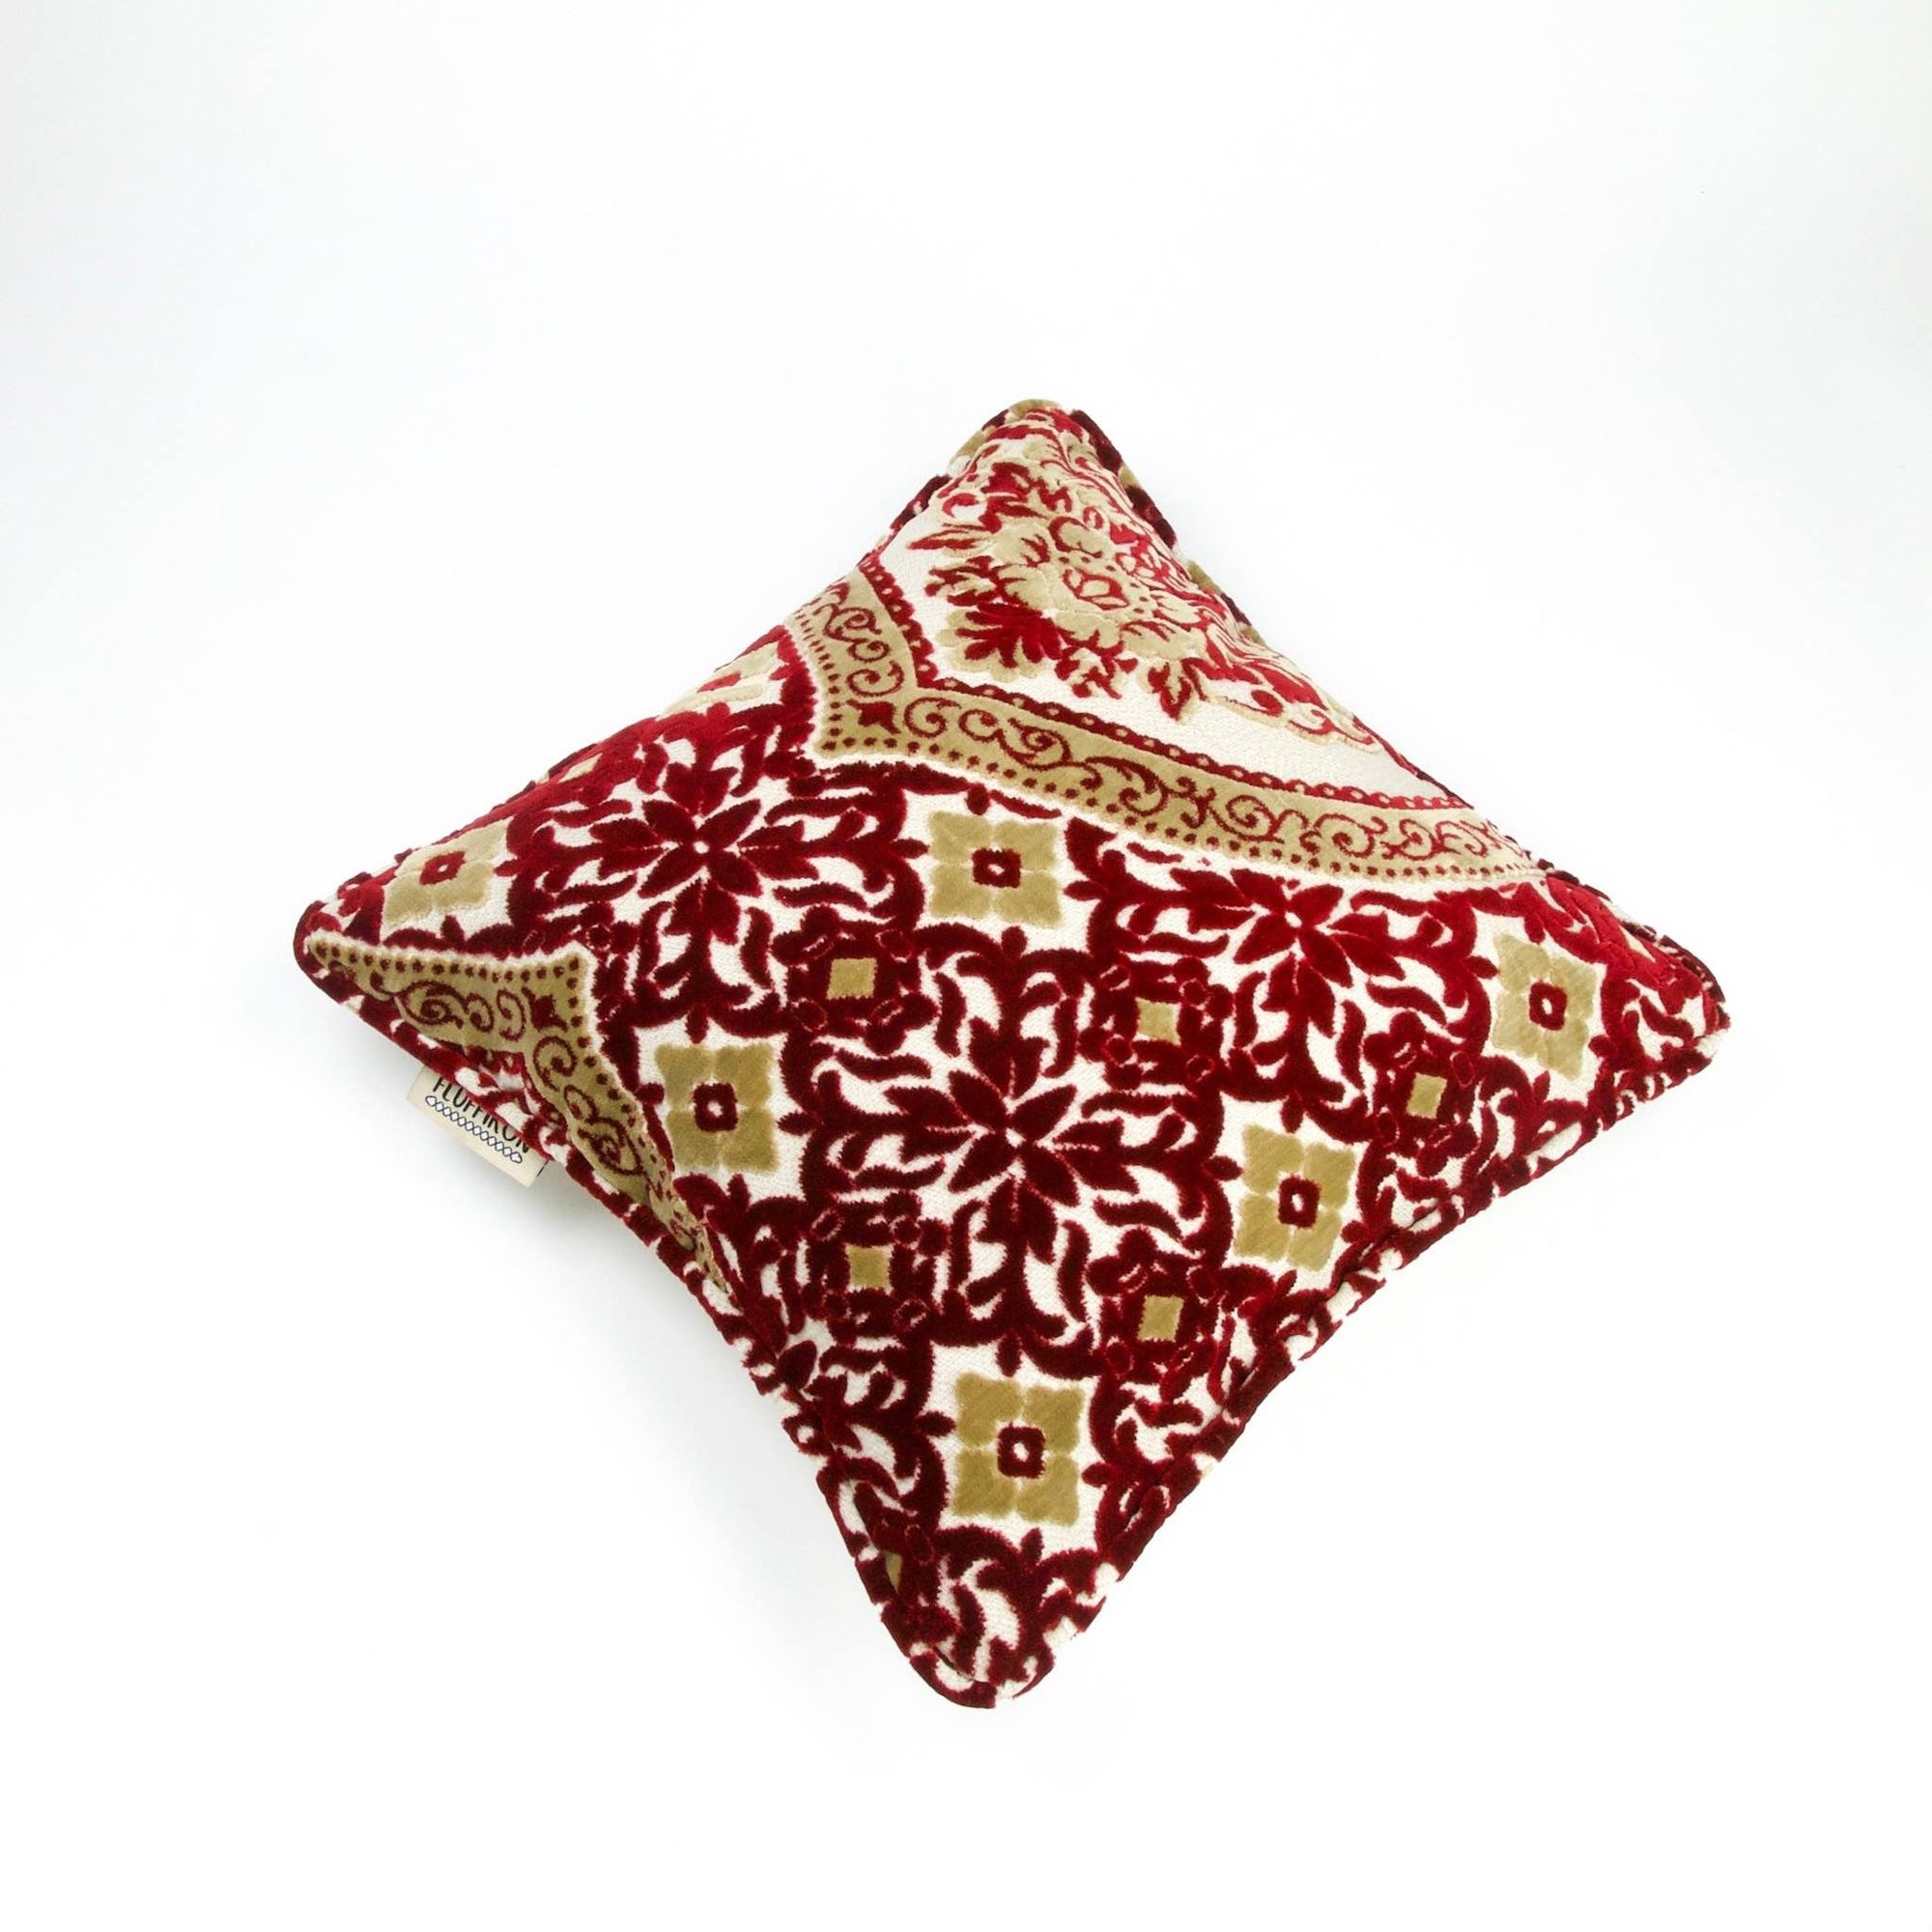 Moroccan couch cushion with red white yellow velvet fabric.